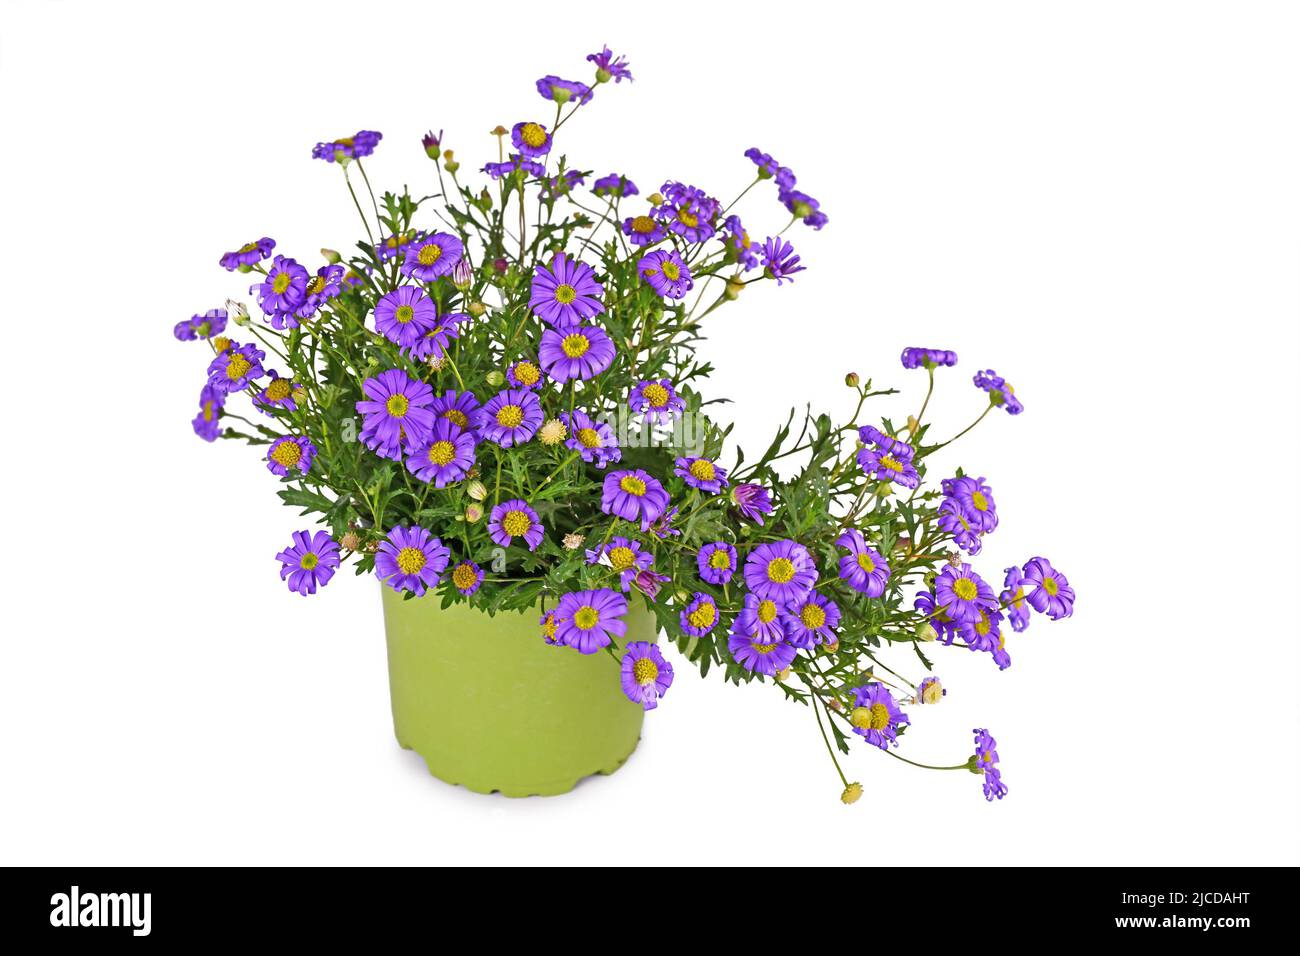 Blooming purple rocky daisy flowers in pot on white background Stock Photo